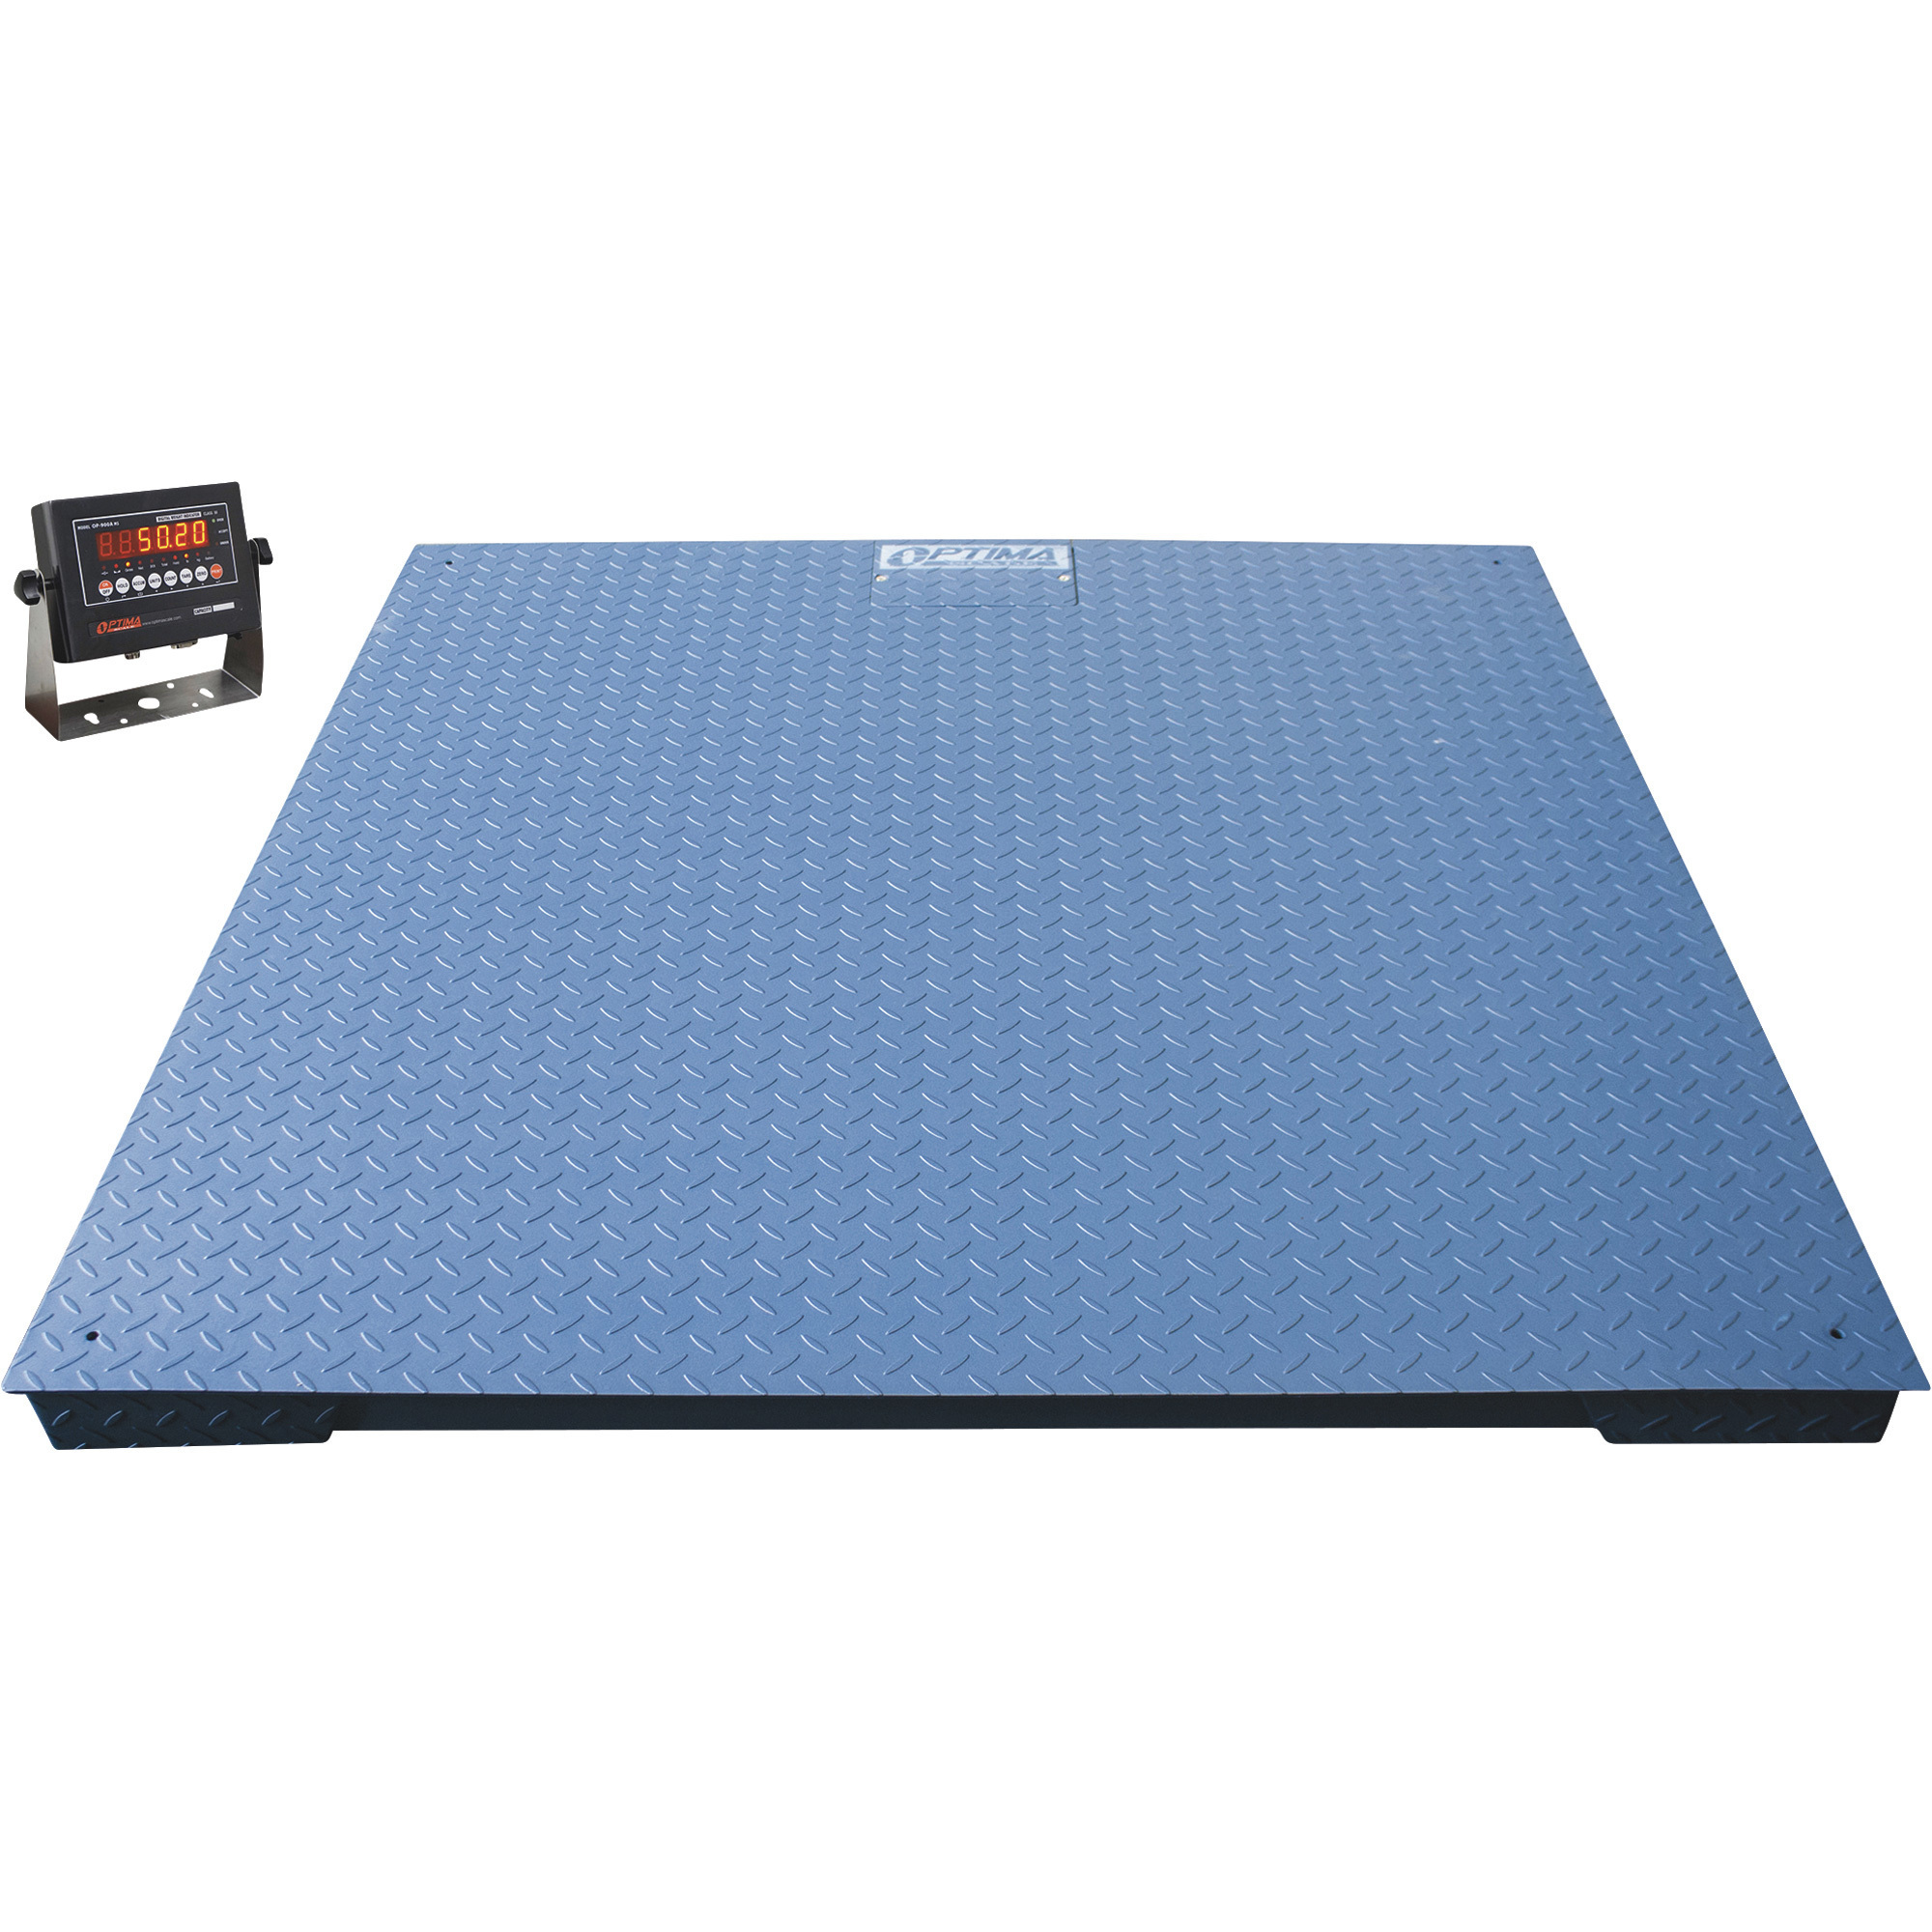 Optima Scale 48Inch x 48Inch Industrial Floor Scale — 5000-Lb. Weight Capacity, 1-lb. Display Increments, Model OP-916-4X4-5K -  OptimaScale